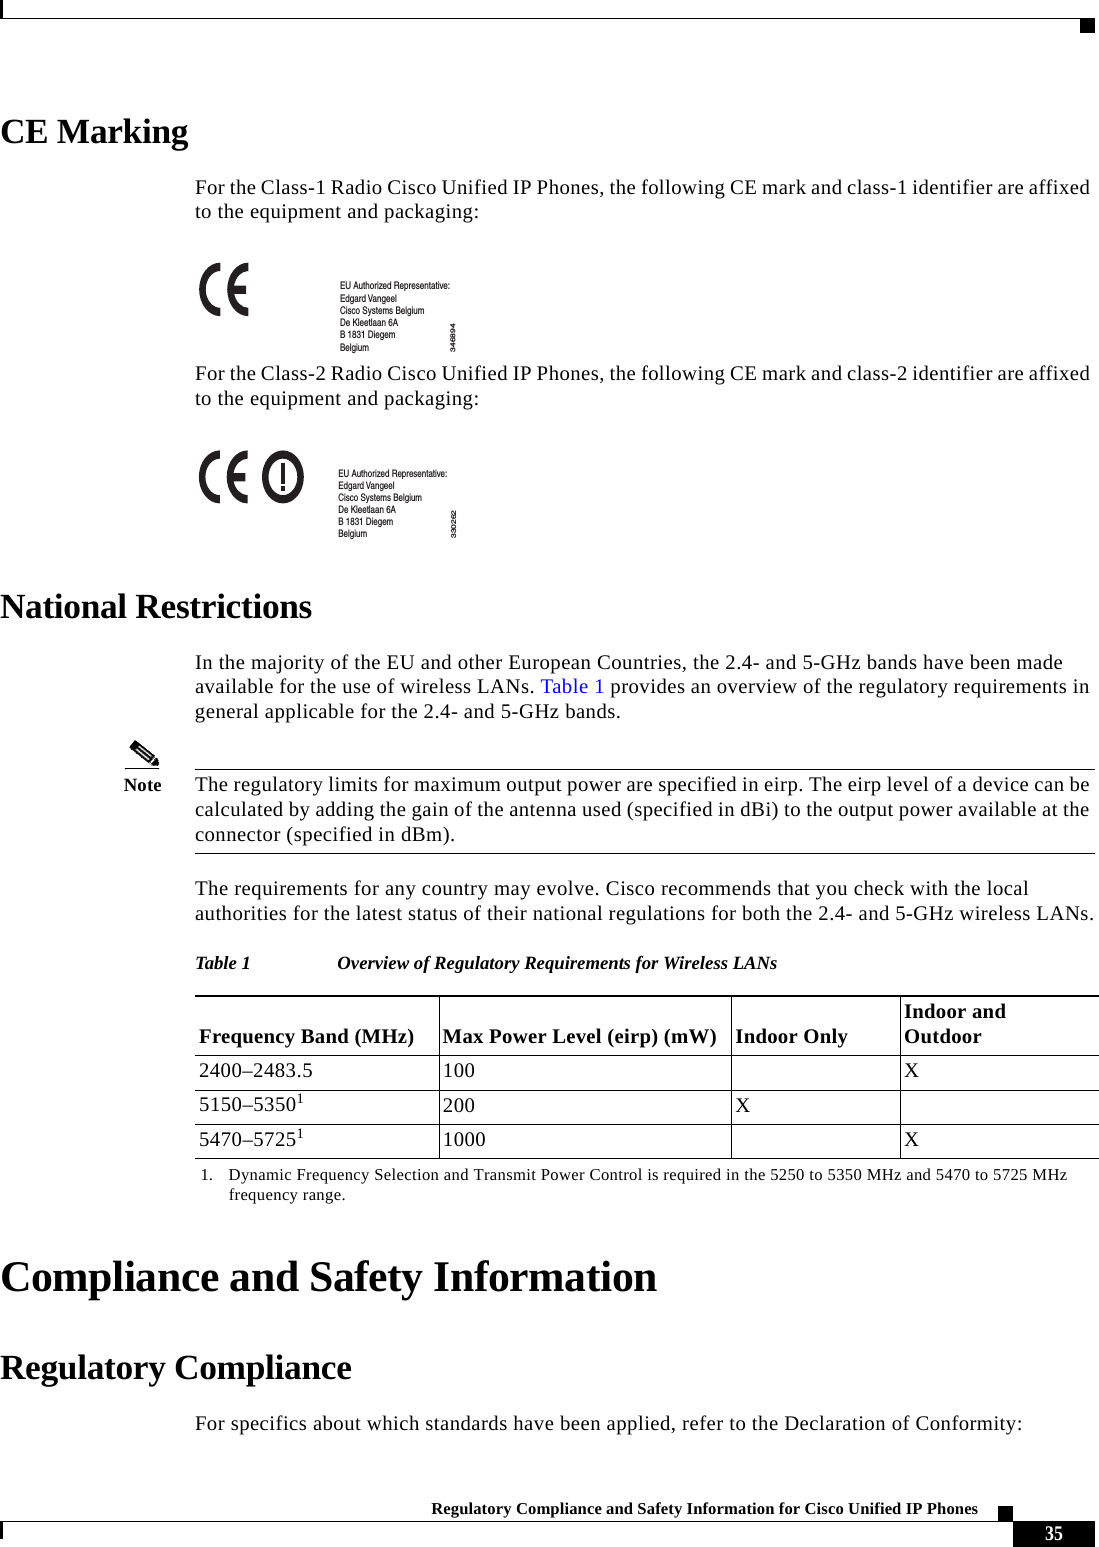  35Regulatory Compliance and Safety Information for Cisco Unified IP Phones CE MarkingFor the Class-1 Radio Cisco Unified IP Phones, the following CE mark and class-1 identifier are affixed to the equipment and packaging:For the Class-2 Radio Cisco Unified IP Phones, the following CE mark and class-2 identifier are affixed to the equipment and packaging:National RestrictionsIn the majority of the EU and other European Countries, the 2.4- and 5-GHz bands have been made available for the use of wireless LANs. Table 1 provides an overview of the regulatory requirements in general applicable for the 2.4- and 5-GHz bands.Note The regulatory limits for maximum output power are specified in eirp. The eirp level of a device can be calculated by adding the gain of the antenna used (specified in dBi) to the output power available at the connector (specified in dBm).The requirements for any country may evolve. Cisco recommends that you check with the local authorities for the latest status of their national regulations for both the 2.4- and 5-GHz wireless LANs.Compliance and Safety InformationRegulatory ComplianceFor specifics about which standards have been applied, refer to the Declaration of Conformity:346894EU Authorized Representative:Edgard VangeelCisco Systems BelgiumDe Kleetlaan 6AB 1831 DiegemBelgium330262EU Authorized Representative:Edgard VangeelCisco Systems BelgiumDe Kleetlaan 6AB 1831 DiegemBelgiumTable 1 Overview of Regulatory Requirements for Wireless LANsFrequency Band (MHz) Max Power Level (eirp) (mW) Indoor Only Indoor and Outdoor2400–2483.5 100 X5150–535011. Dynamic Frequency Selection and Transmit Power Control is required in the 5250 to 5350 MHz and 5470 to 5725 MHz frequency range.200 X5470–572511000 X